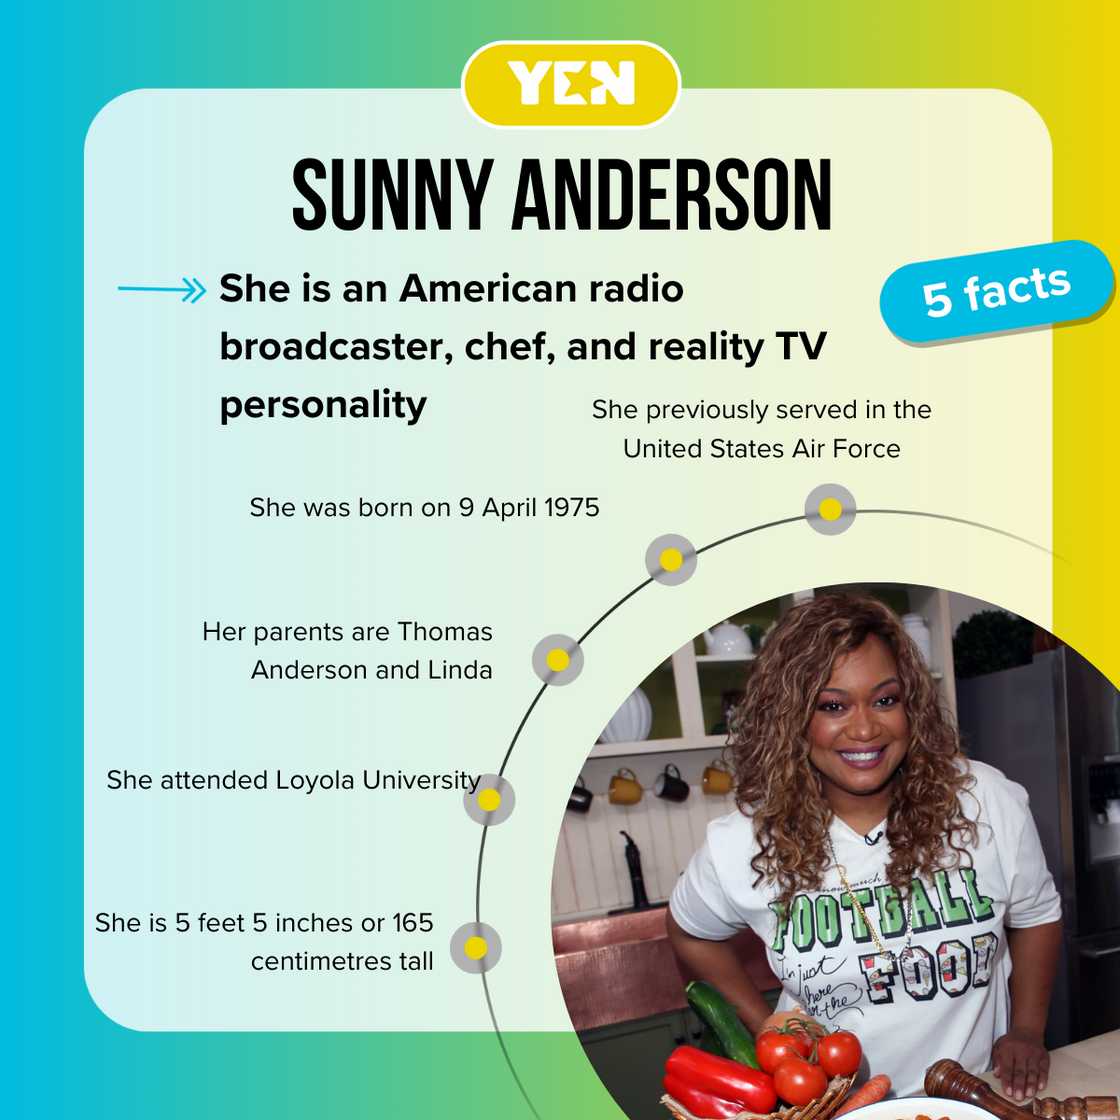 Facts about Sunny Anderson